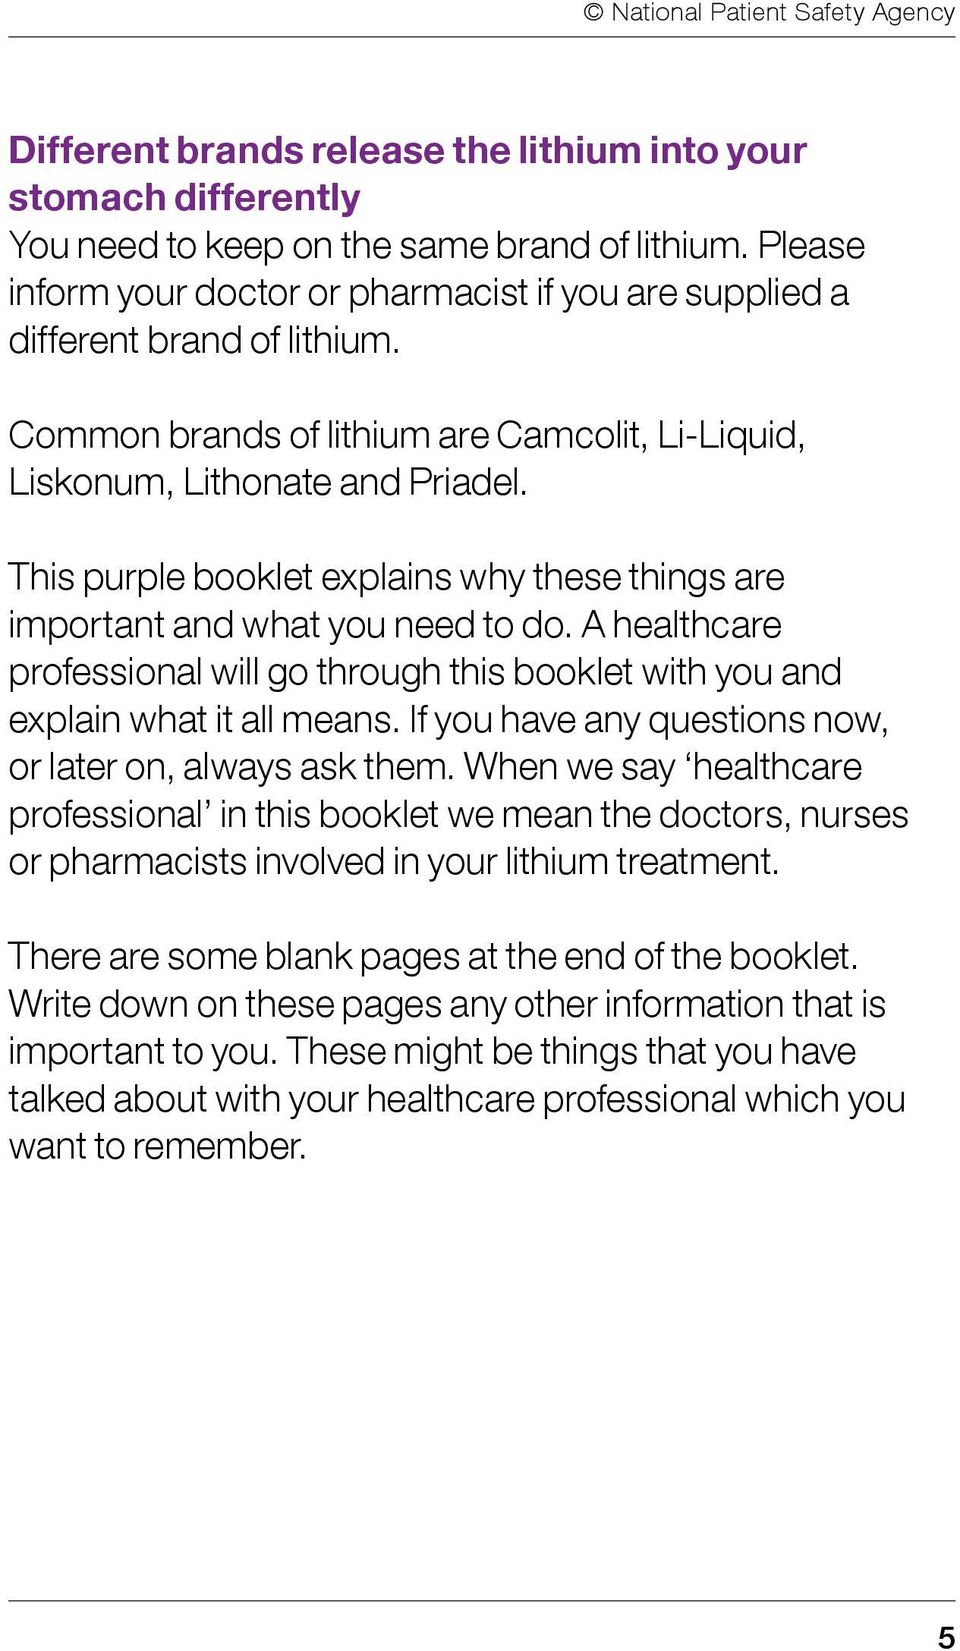 This purple booklet explains why these things are important and what you need to do. A healthcare professional will go through this booklet with you and explain what it all means.